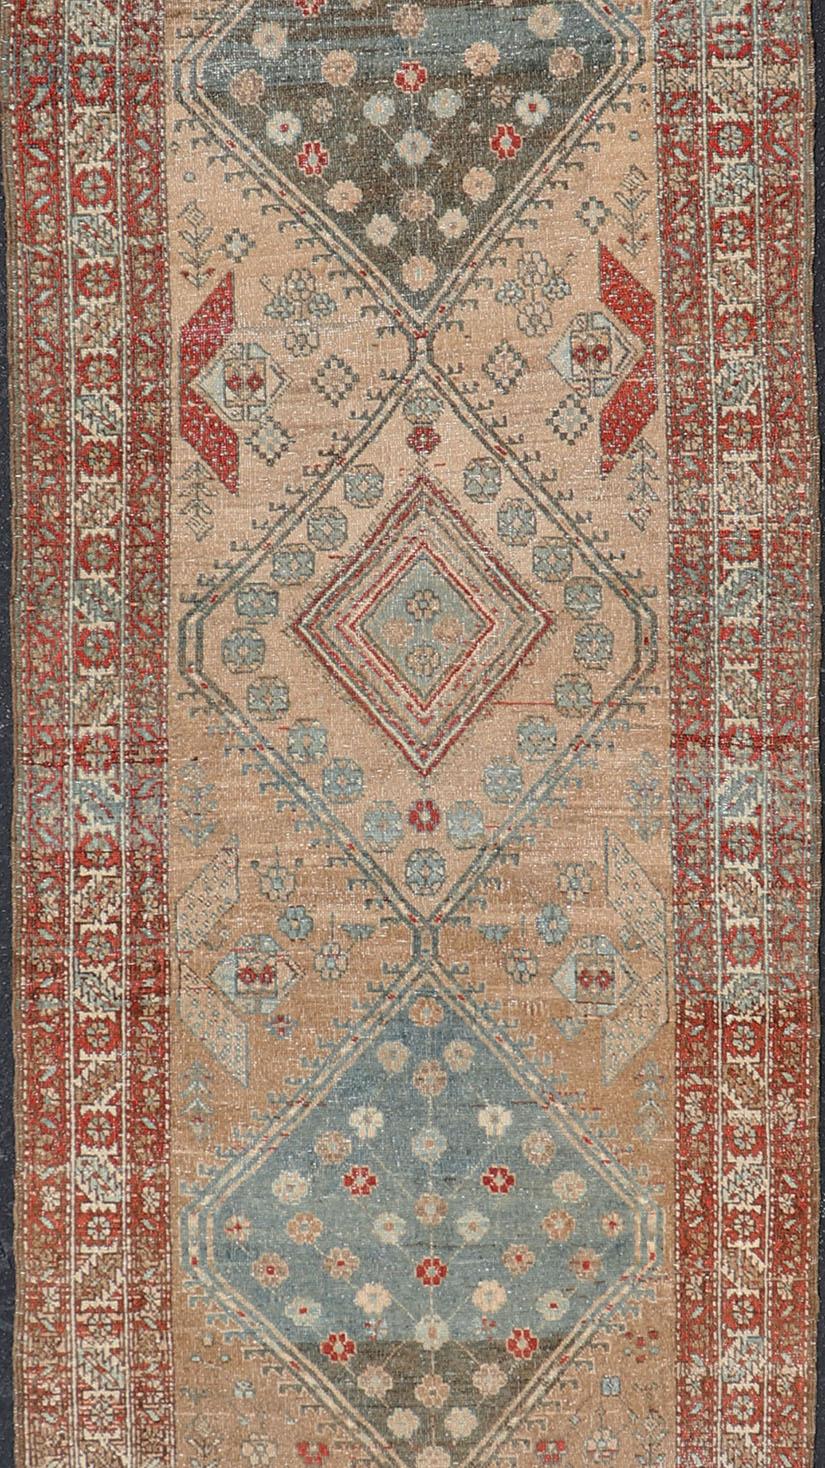 Tribal Antique Persian Serab Runner with Geometric Medallion Design in Red and Tan For Sale